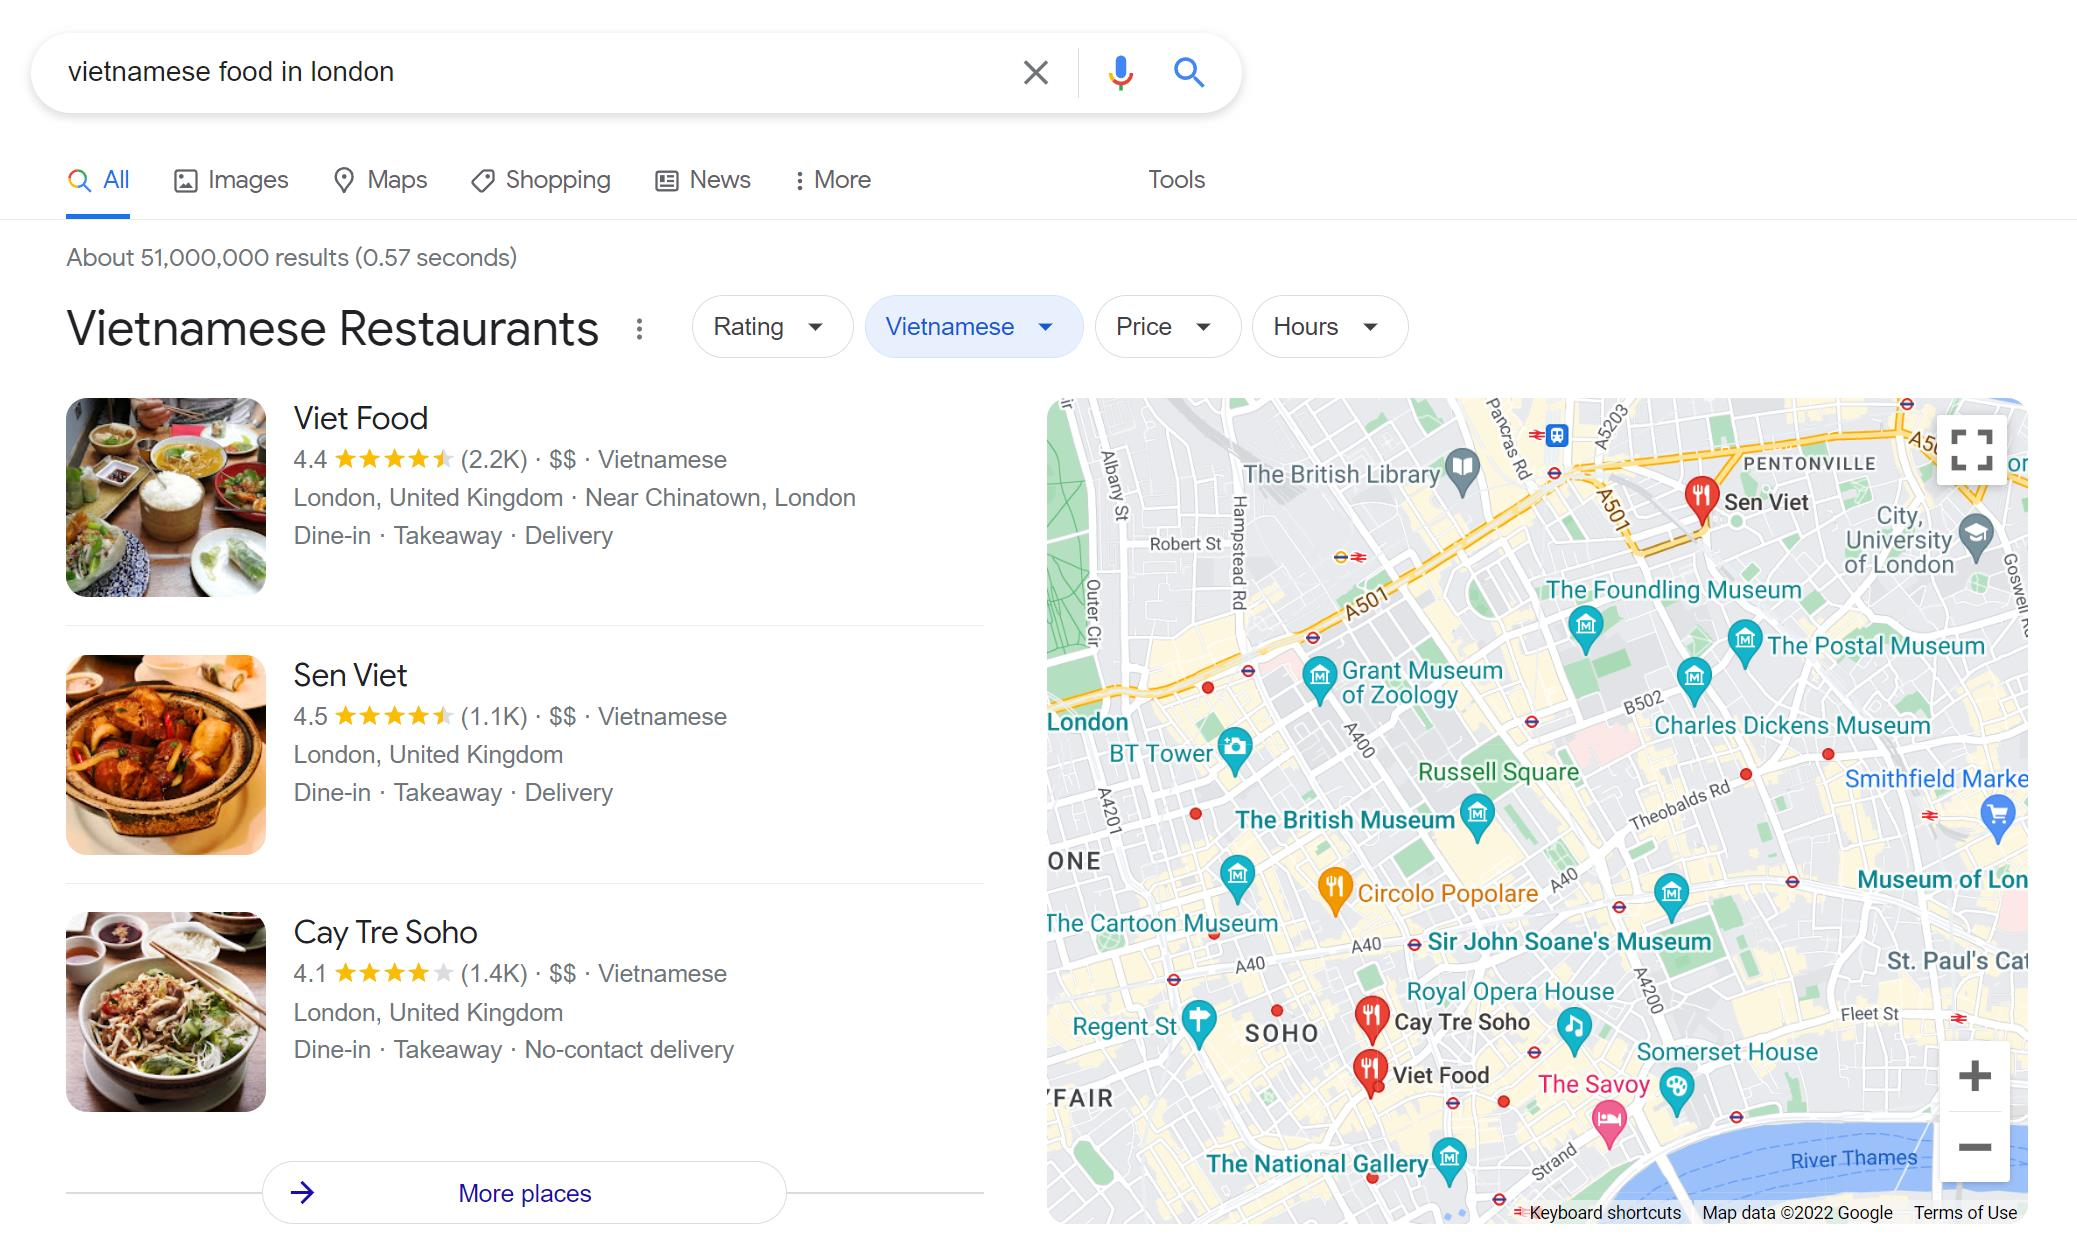 Google Maps results for Vietnamese food in London with easy-to-read reviews